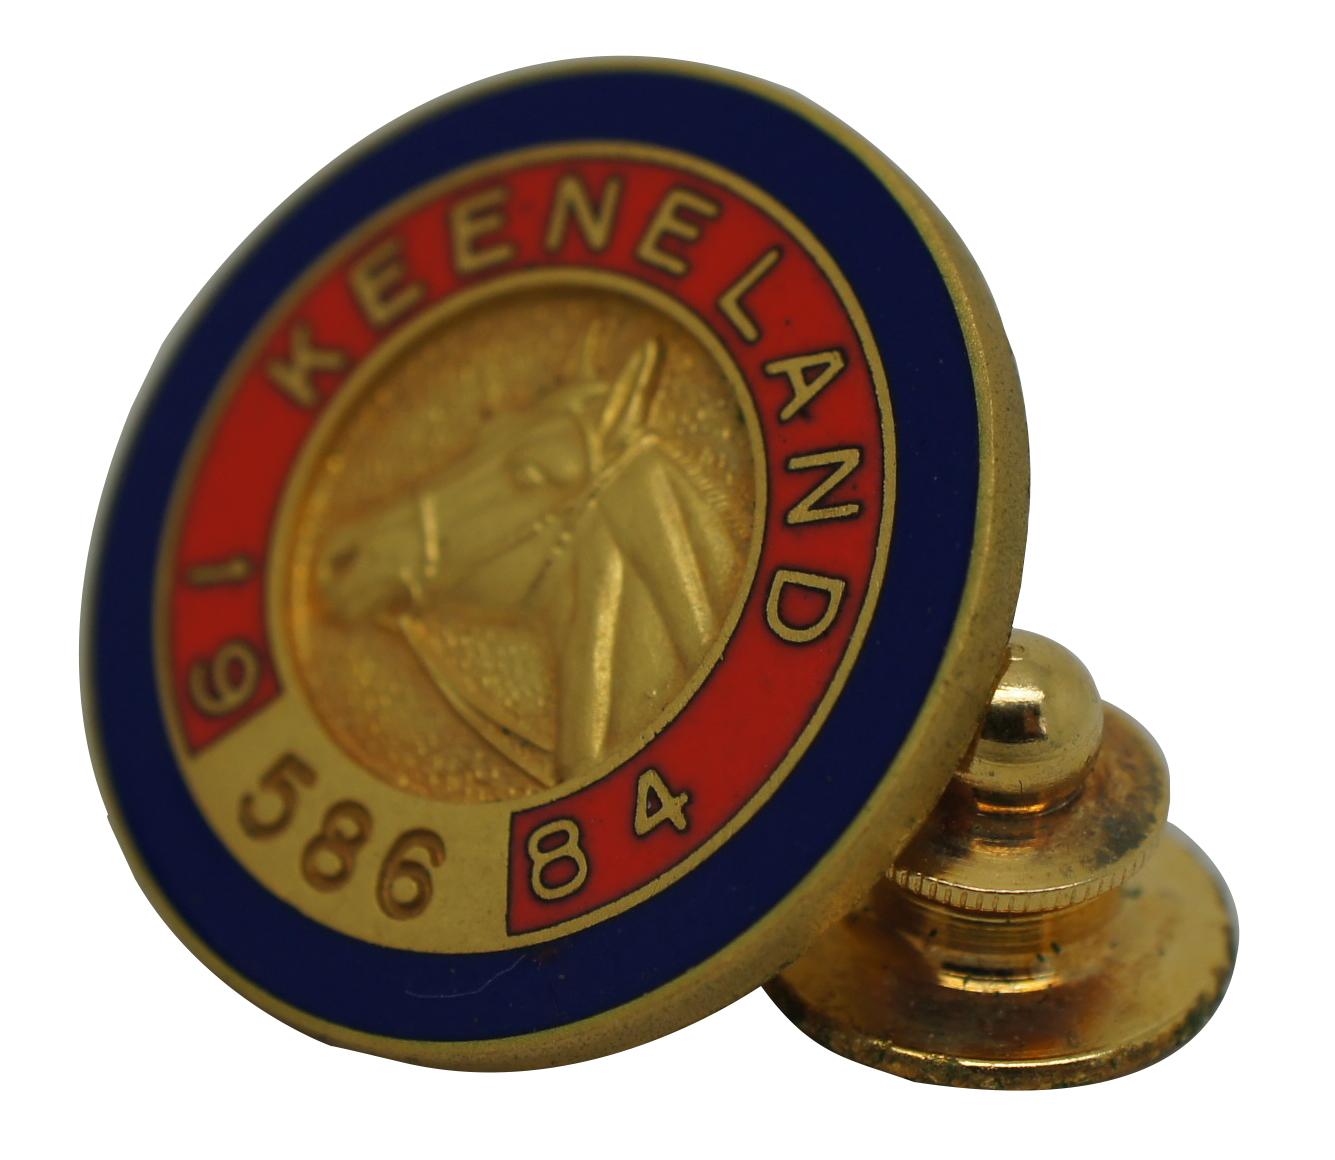 Vintage 1984 member’s pin for the Keeneland Club - a private members' organization created for the benefit of those who are involved in, and who support, the Thoroughbred industry – number 586 Fred Gagel.